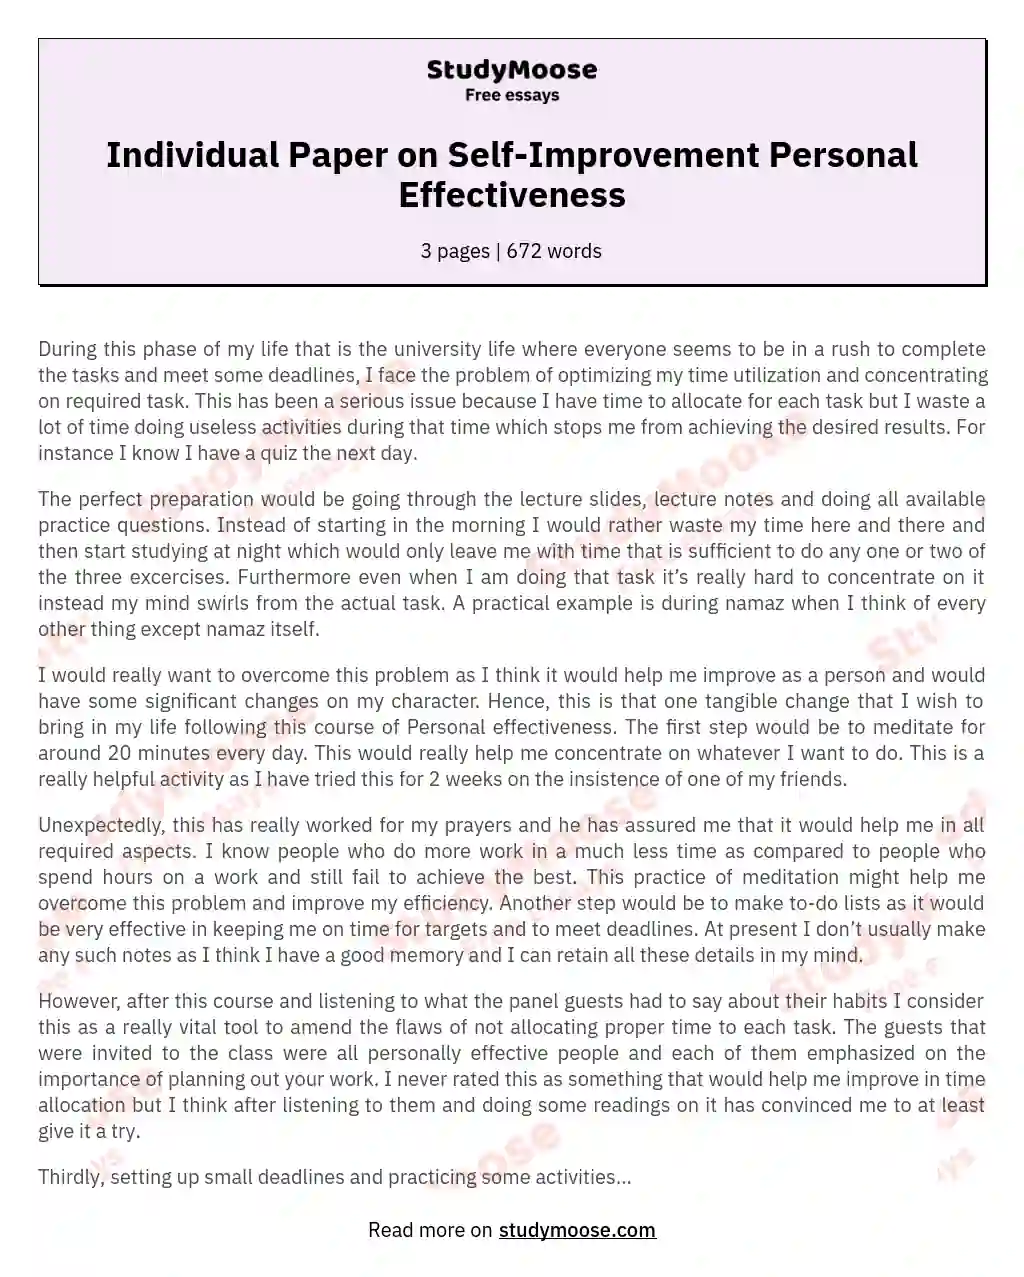 Individual Paper on Self-Improvement Personal Effectiveness essay